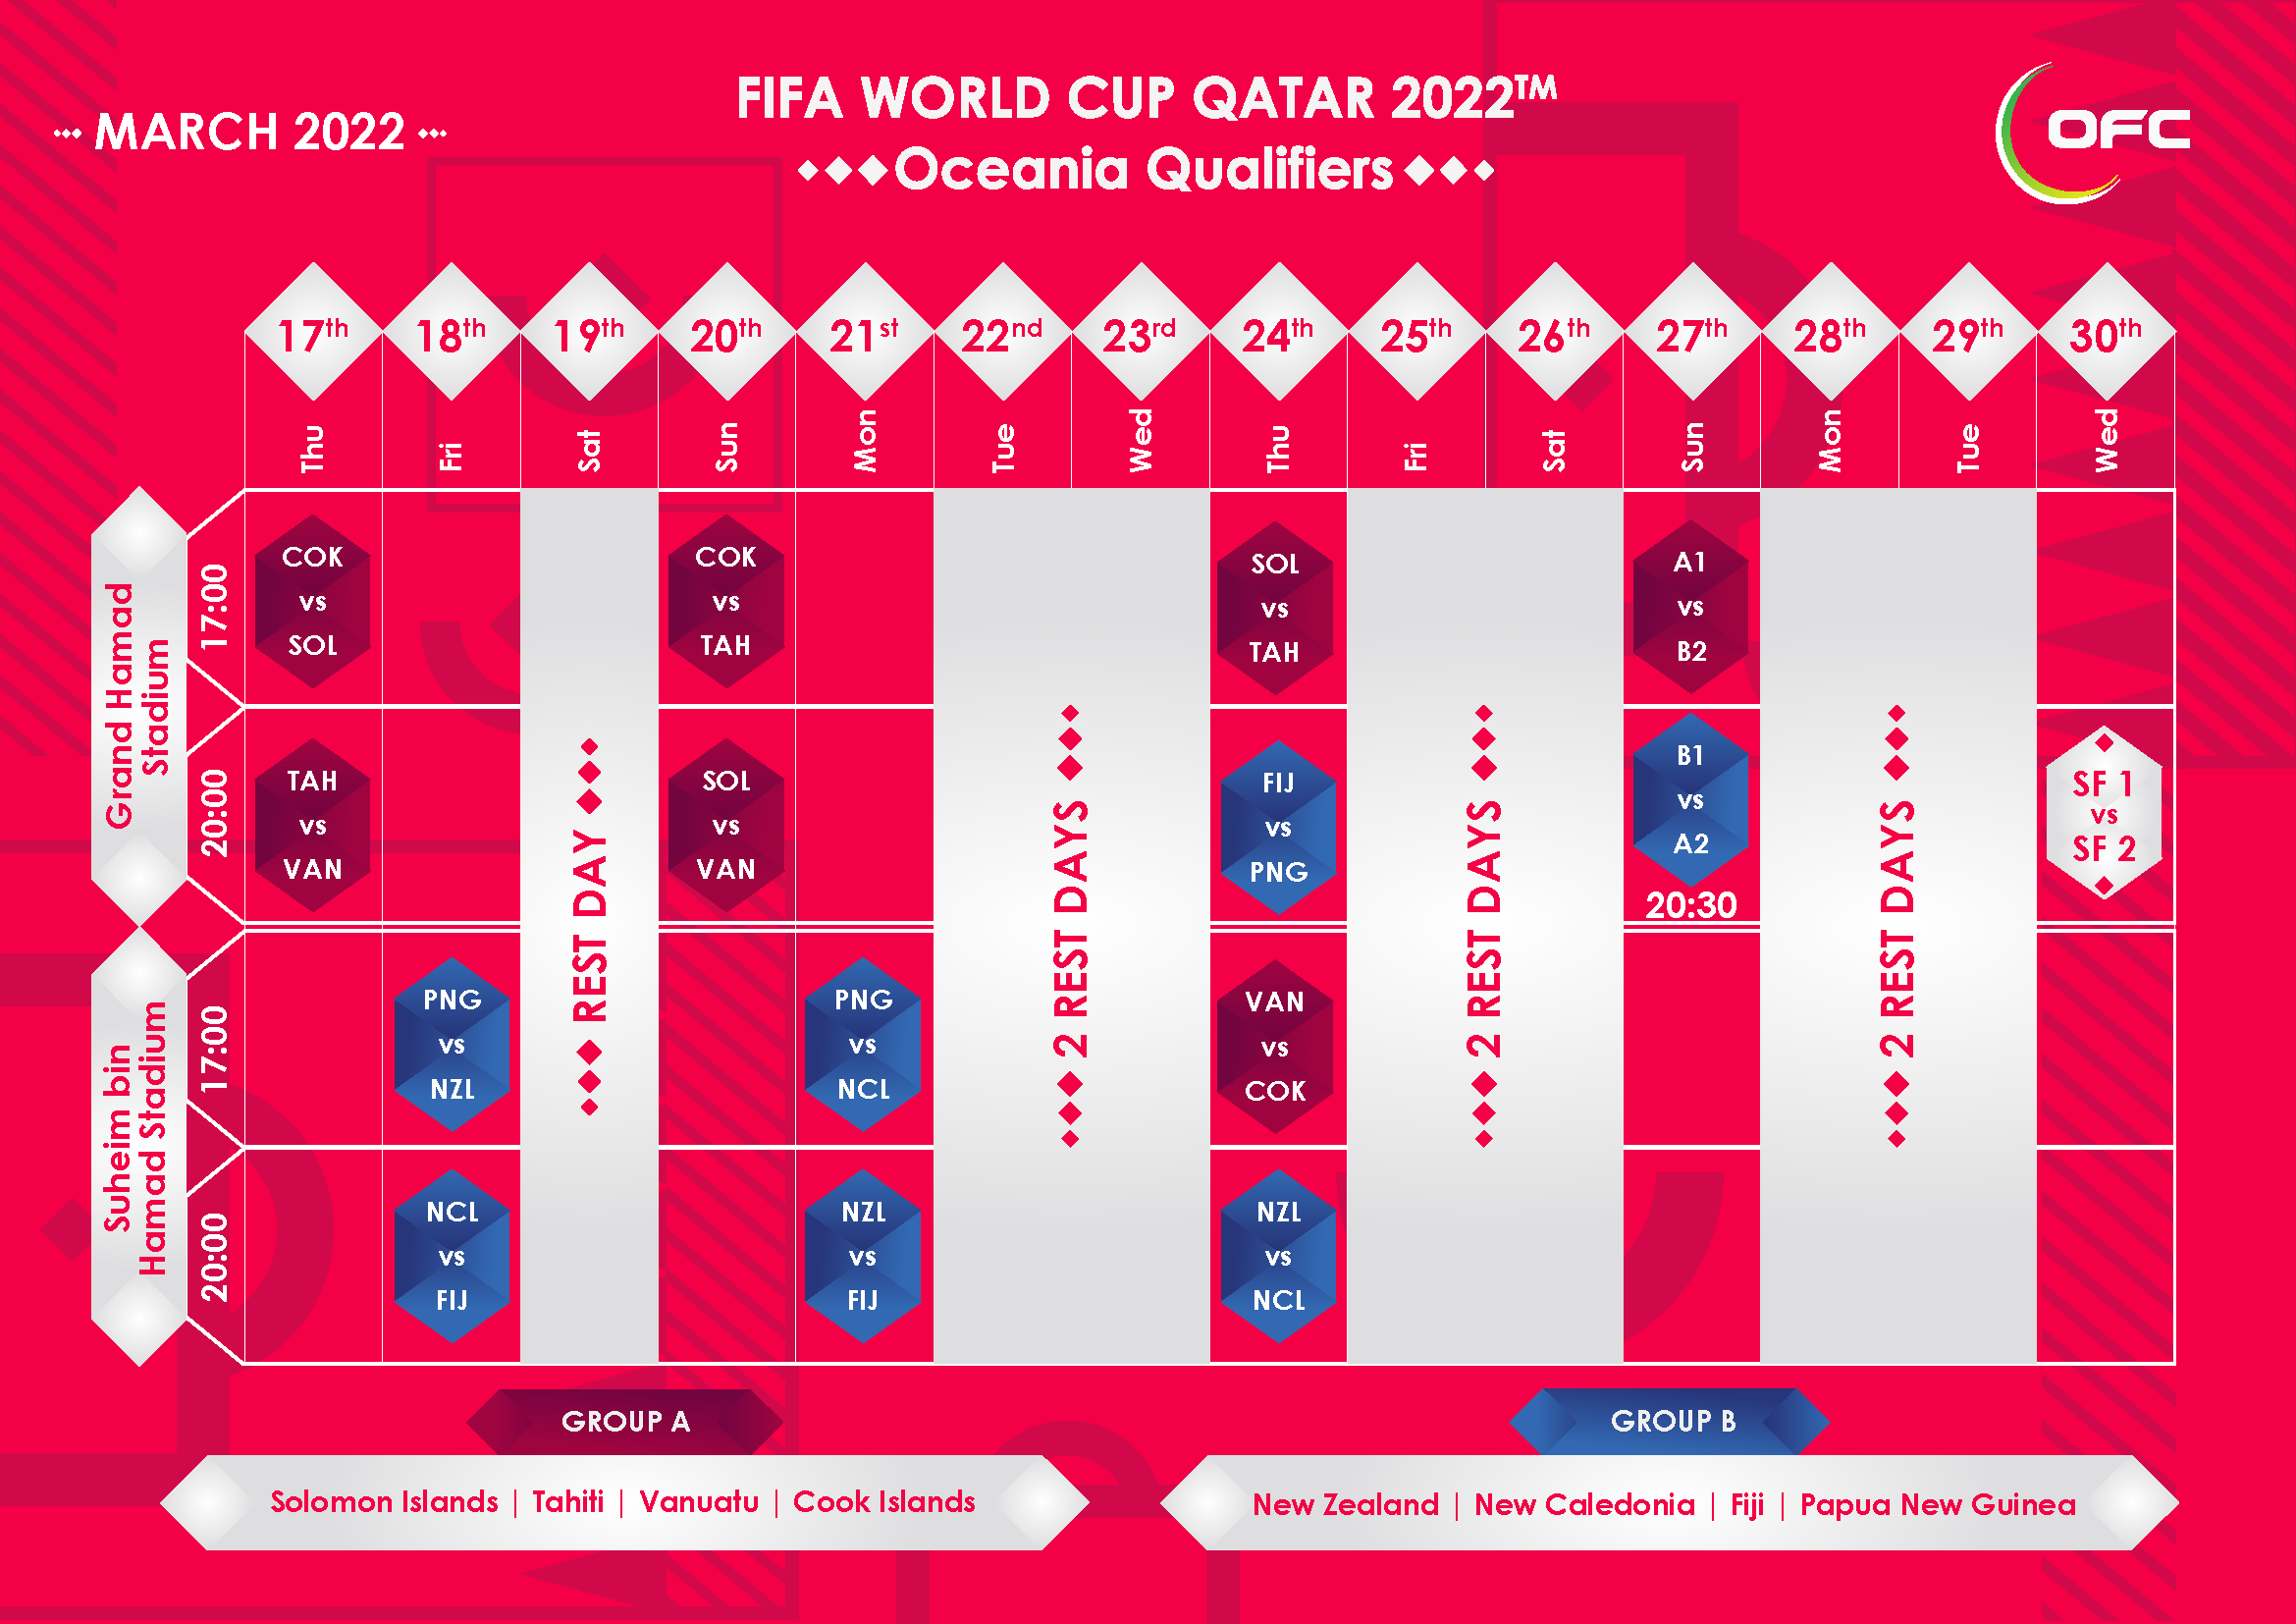 world cup 2022 qualifying tables